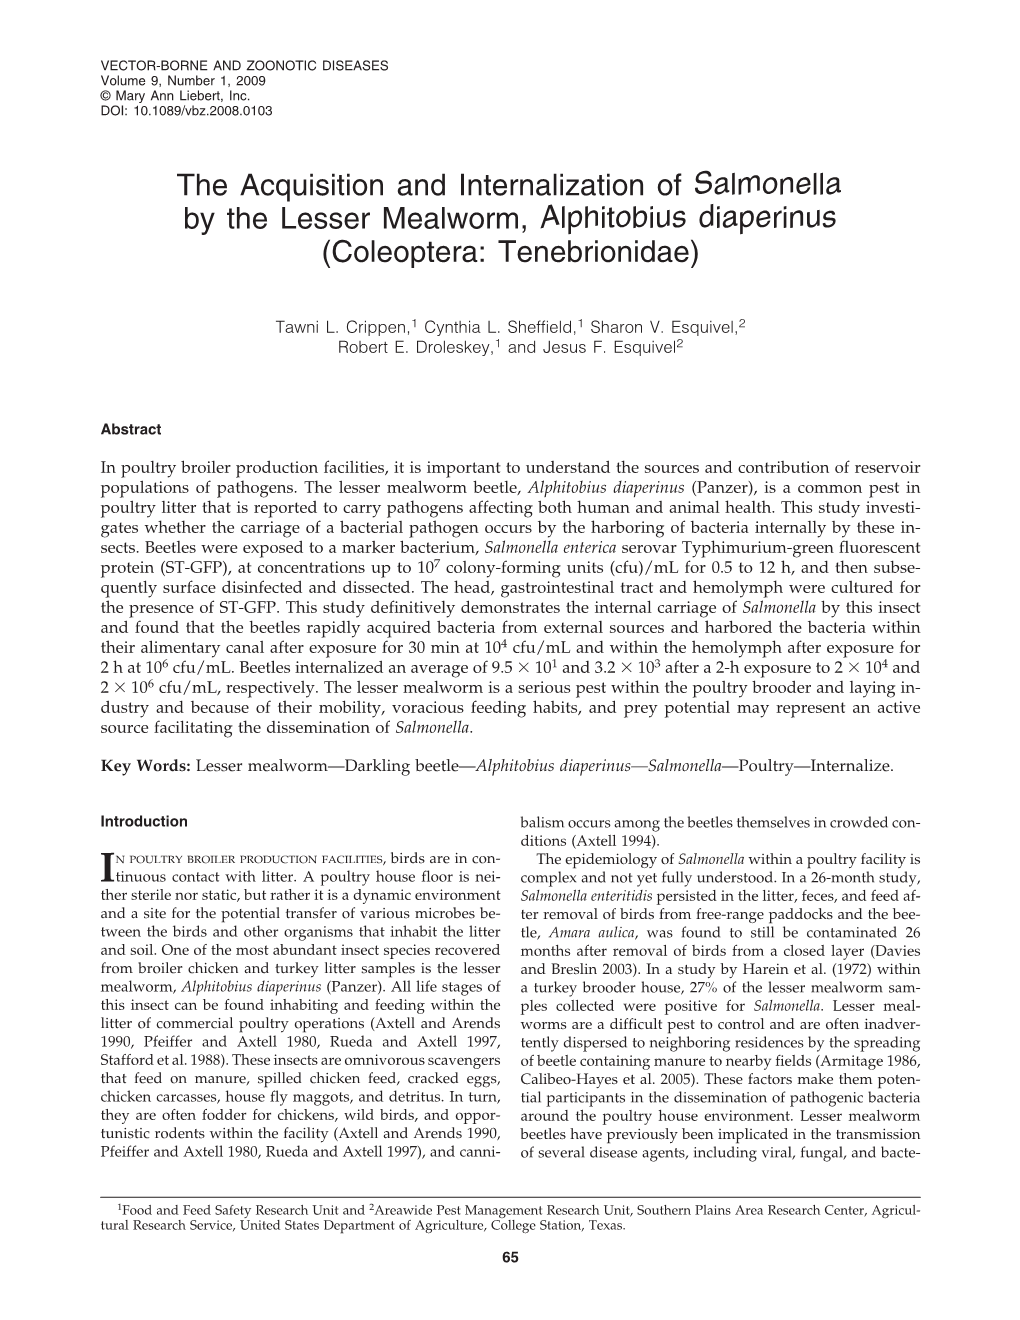 The Acquisition and Internalization of Salmonella by the Lesser Mealworm, Alphitobius Diaperinus (Coleoptera: Tenebrionidae)